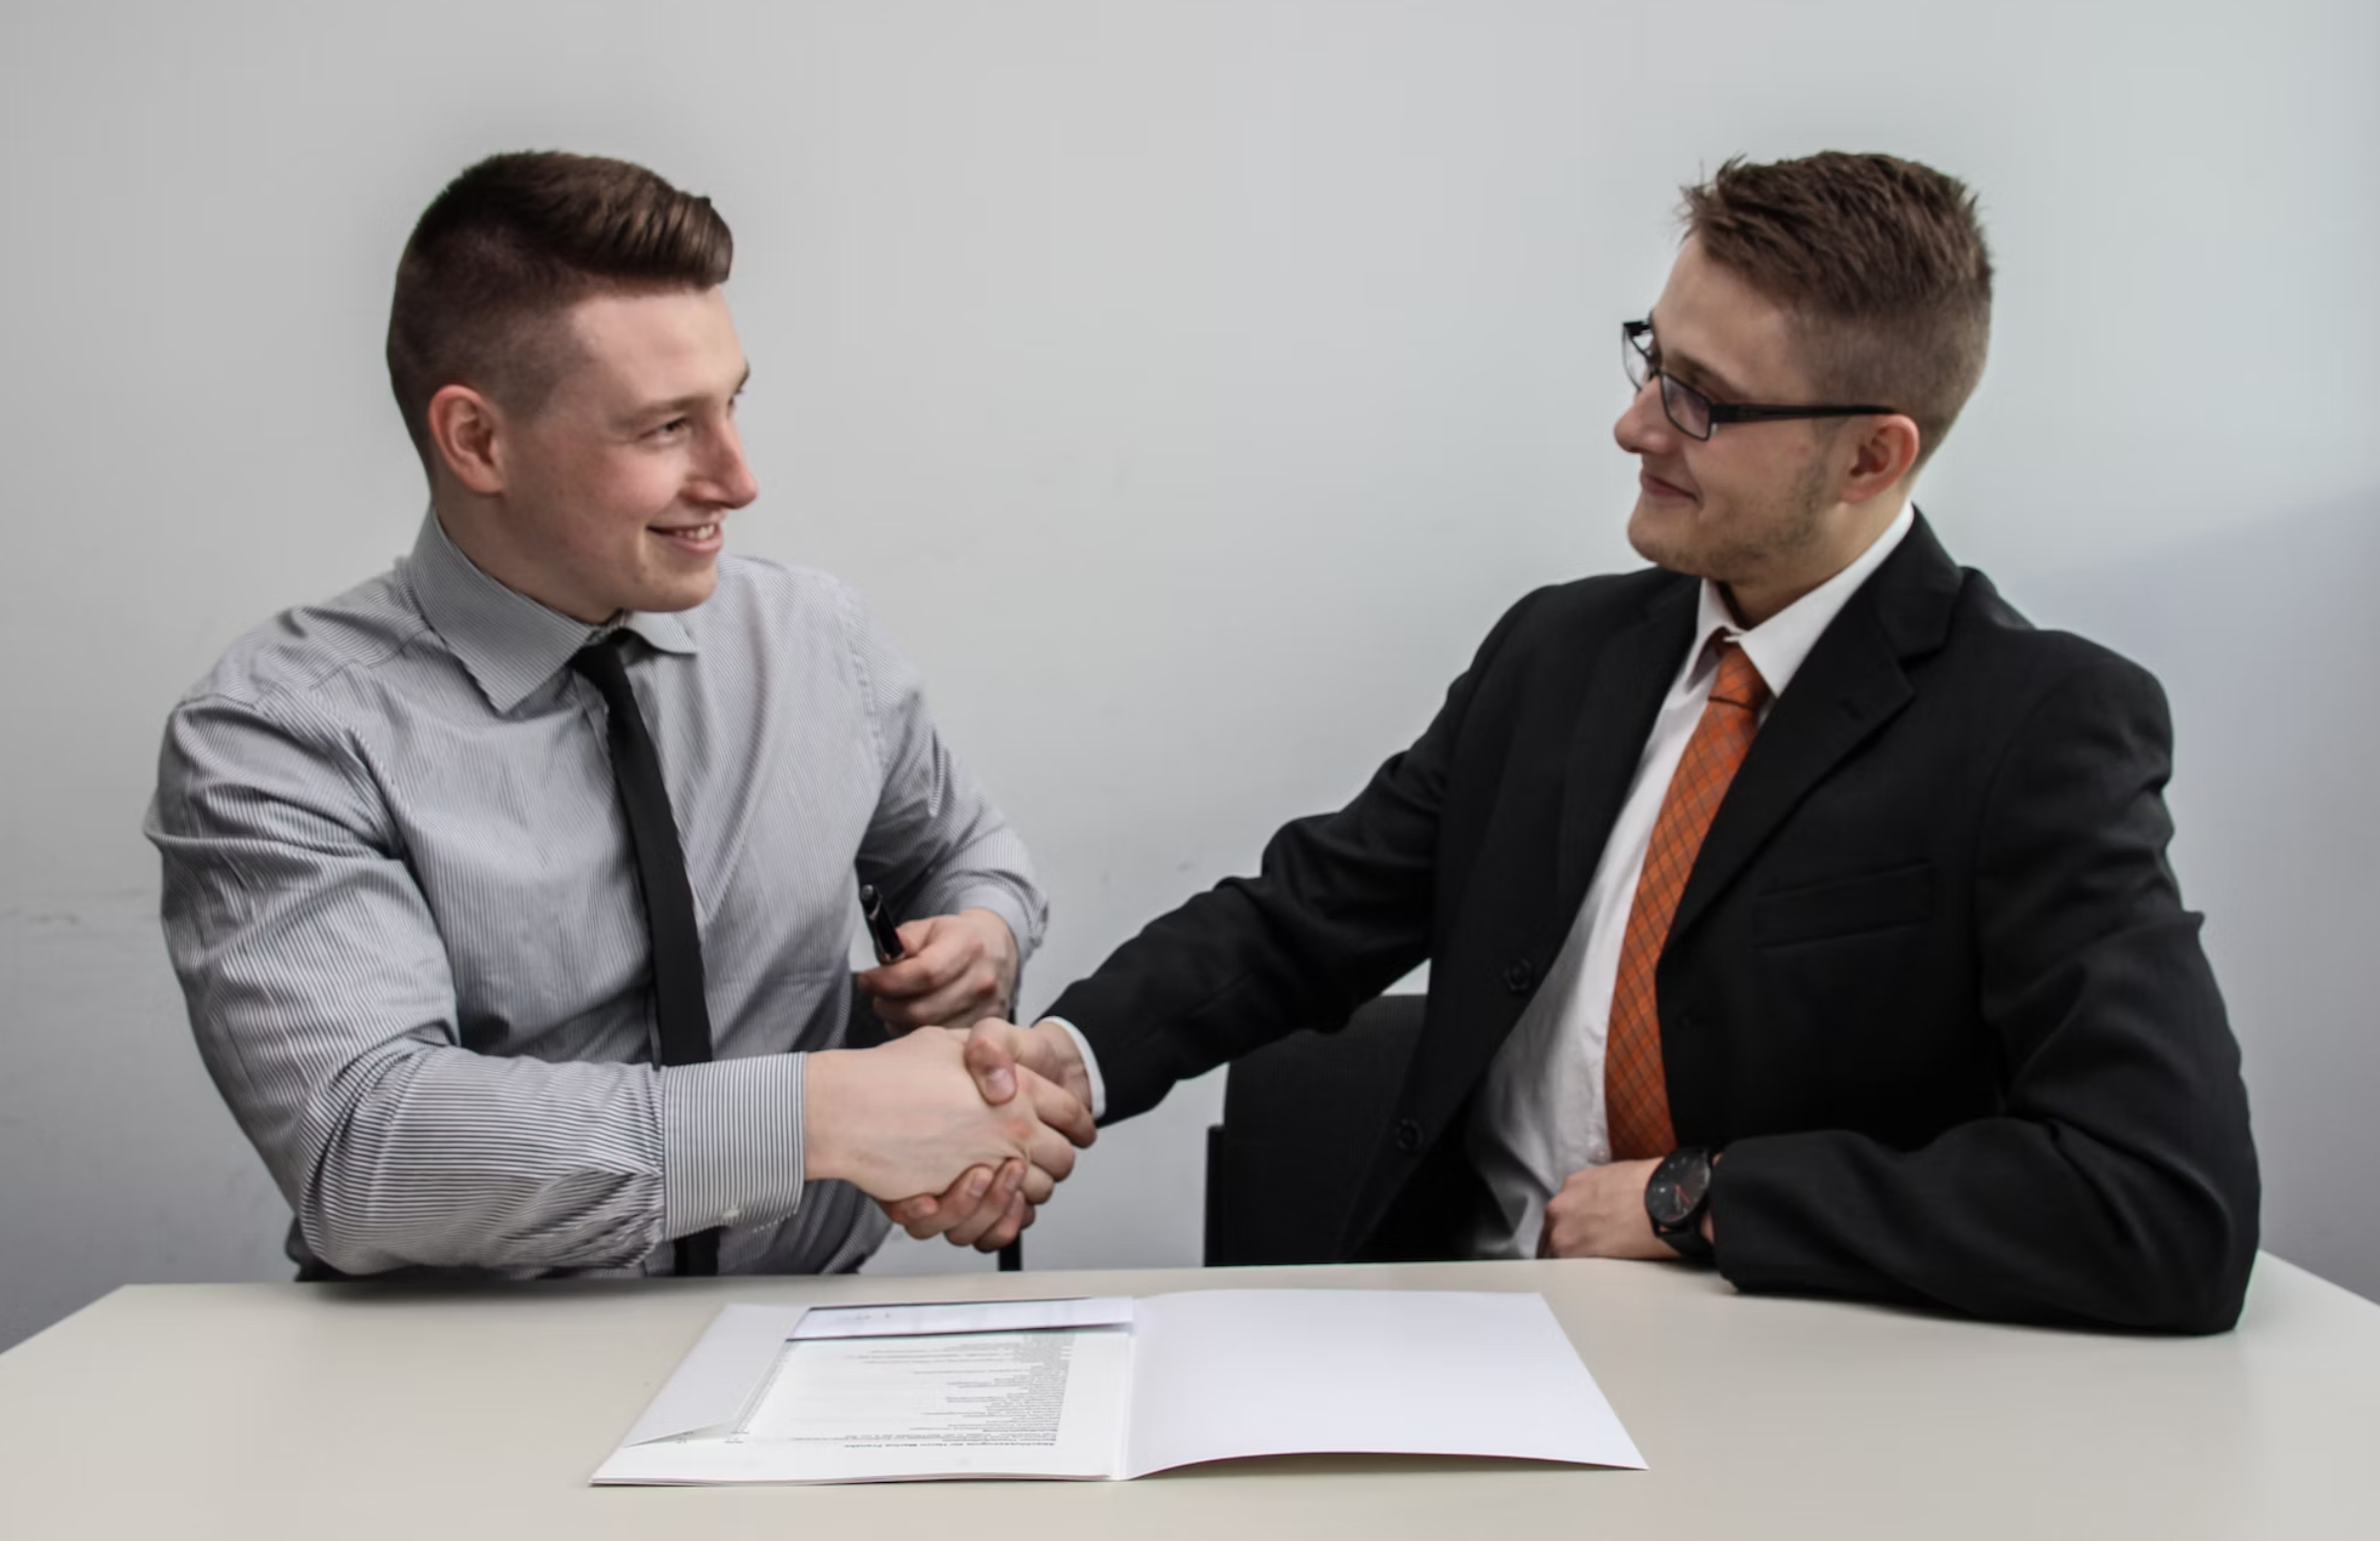 two men shaking hands after business deal 